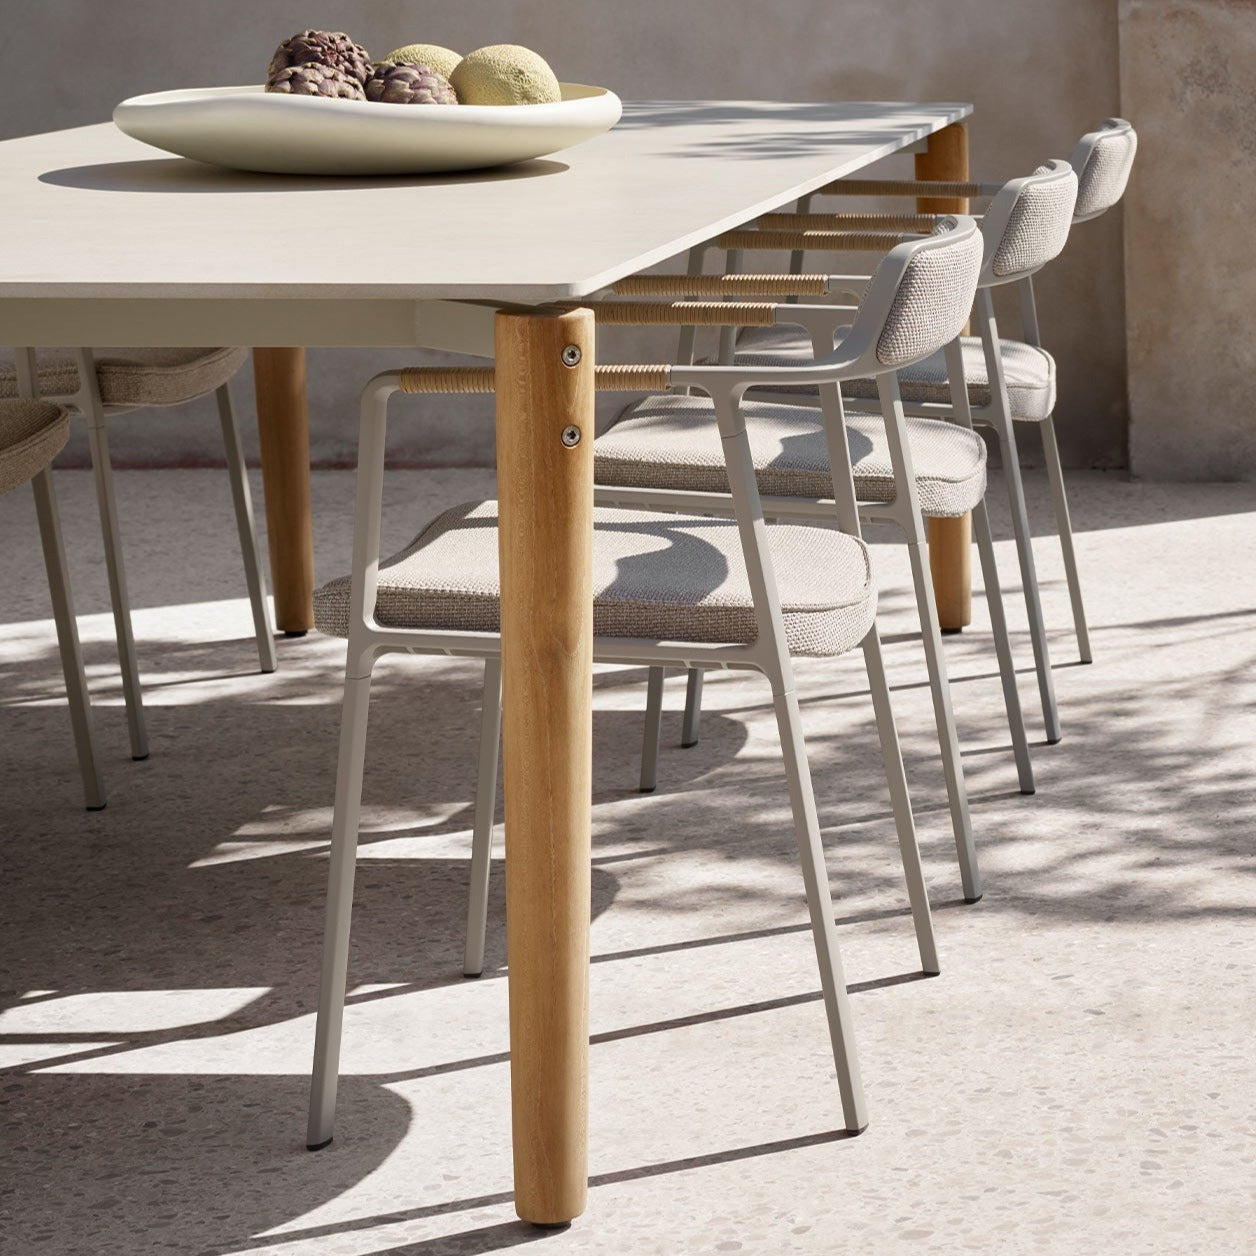 Vipp Open Air Dining Table L157cm